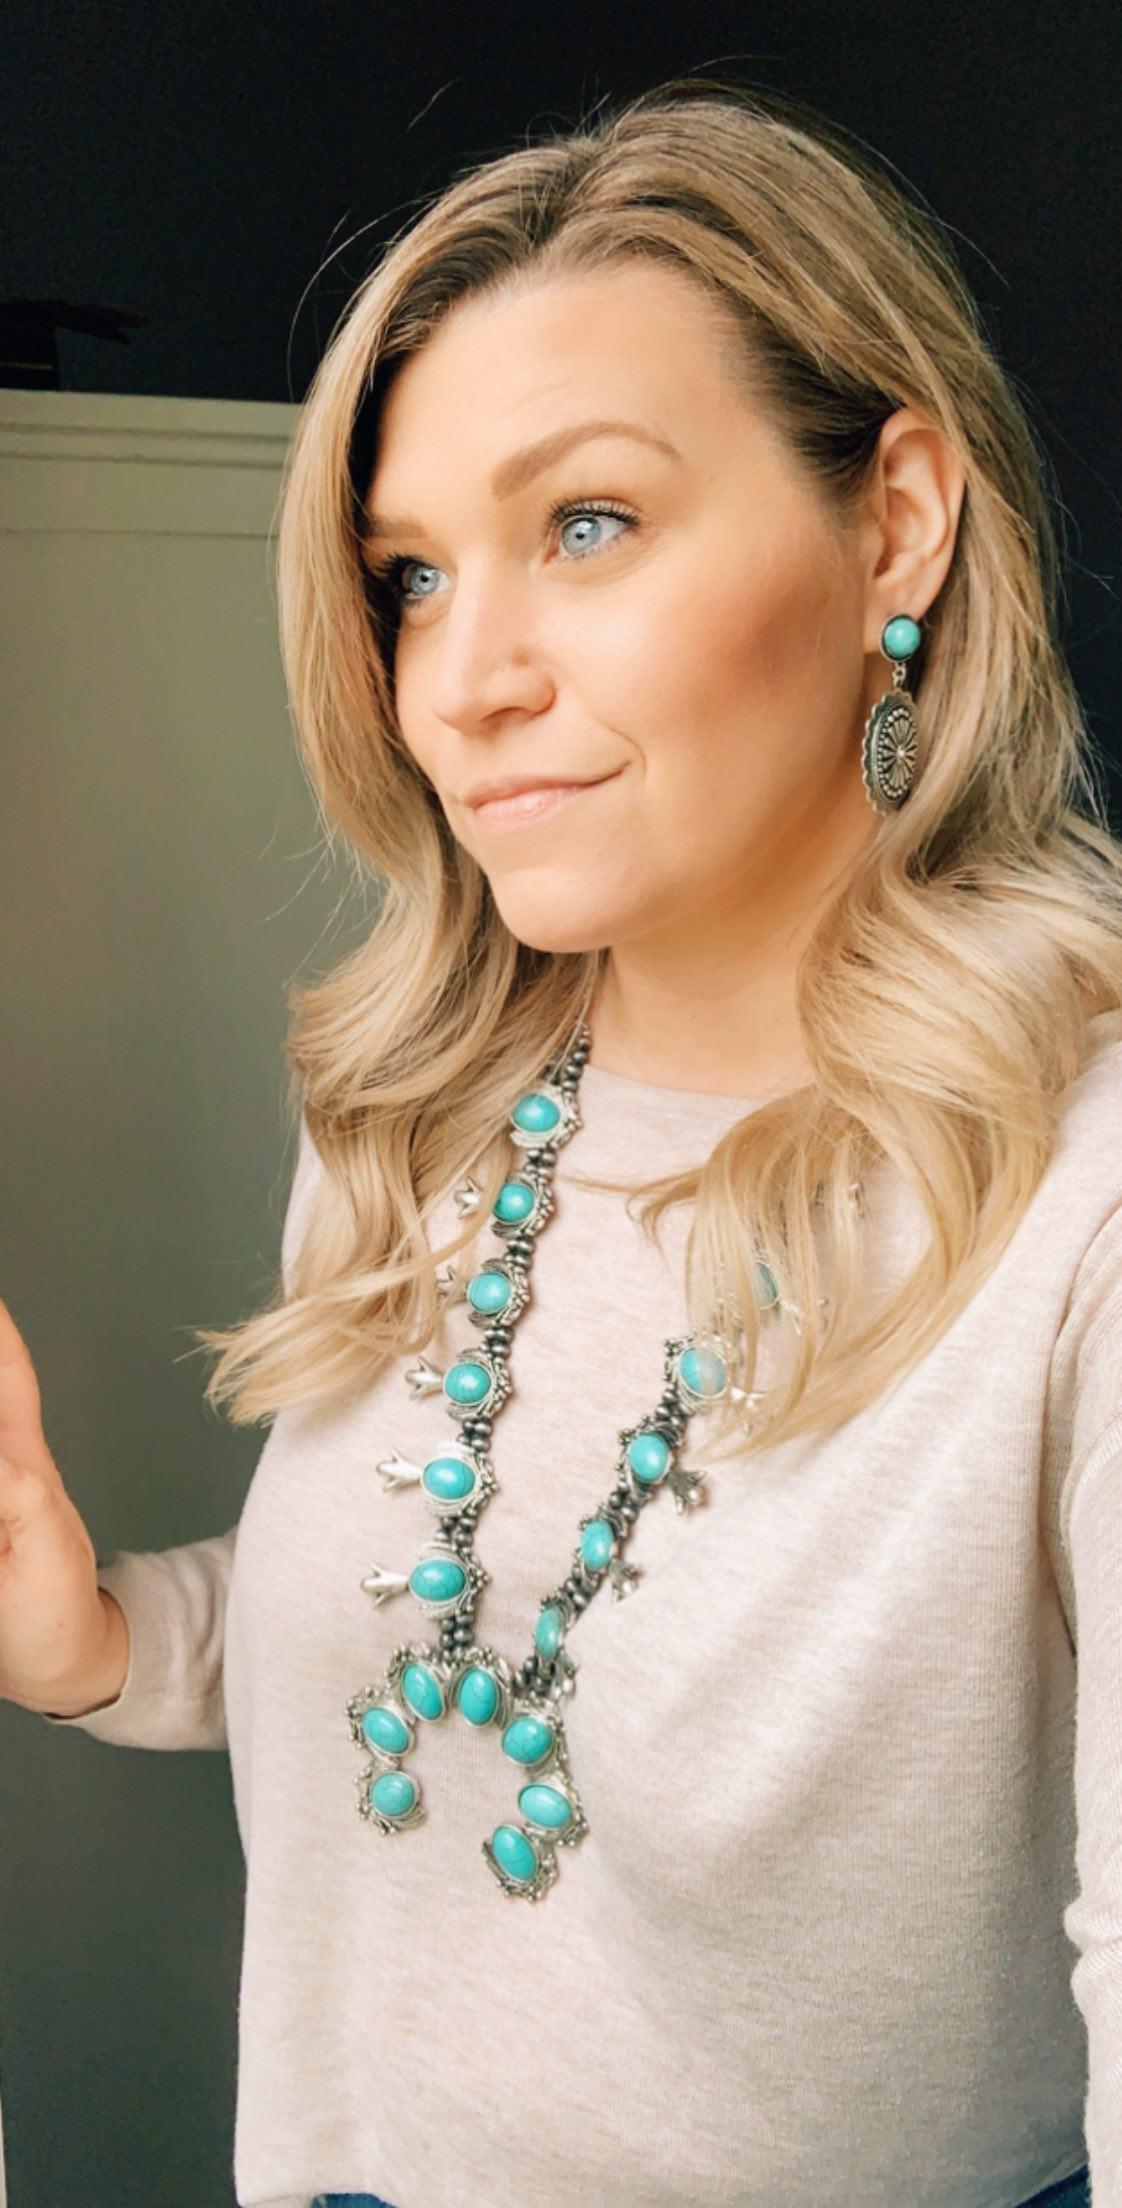 The Jackson Turquoise Squash Blossom Necklace - #wholesaleacc, blossom, cowgirl, jewelry, necklace, southwestern, southwesternjewelry, squash, turquoise, turquoisenecklace, western - Necklaces - Baha Ranch Western Wear